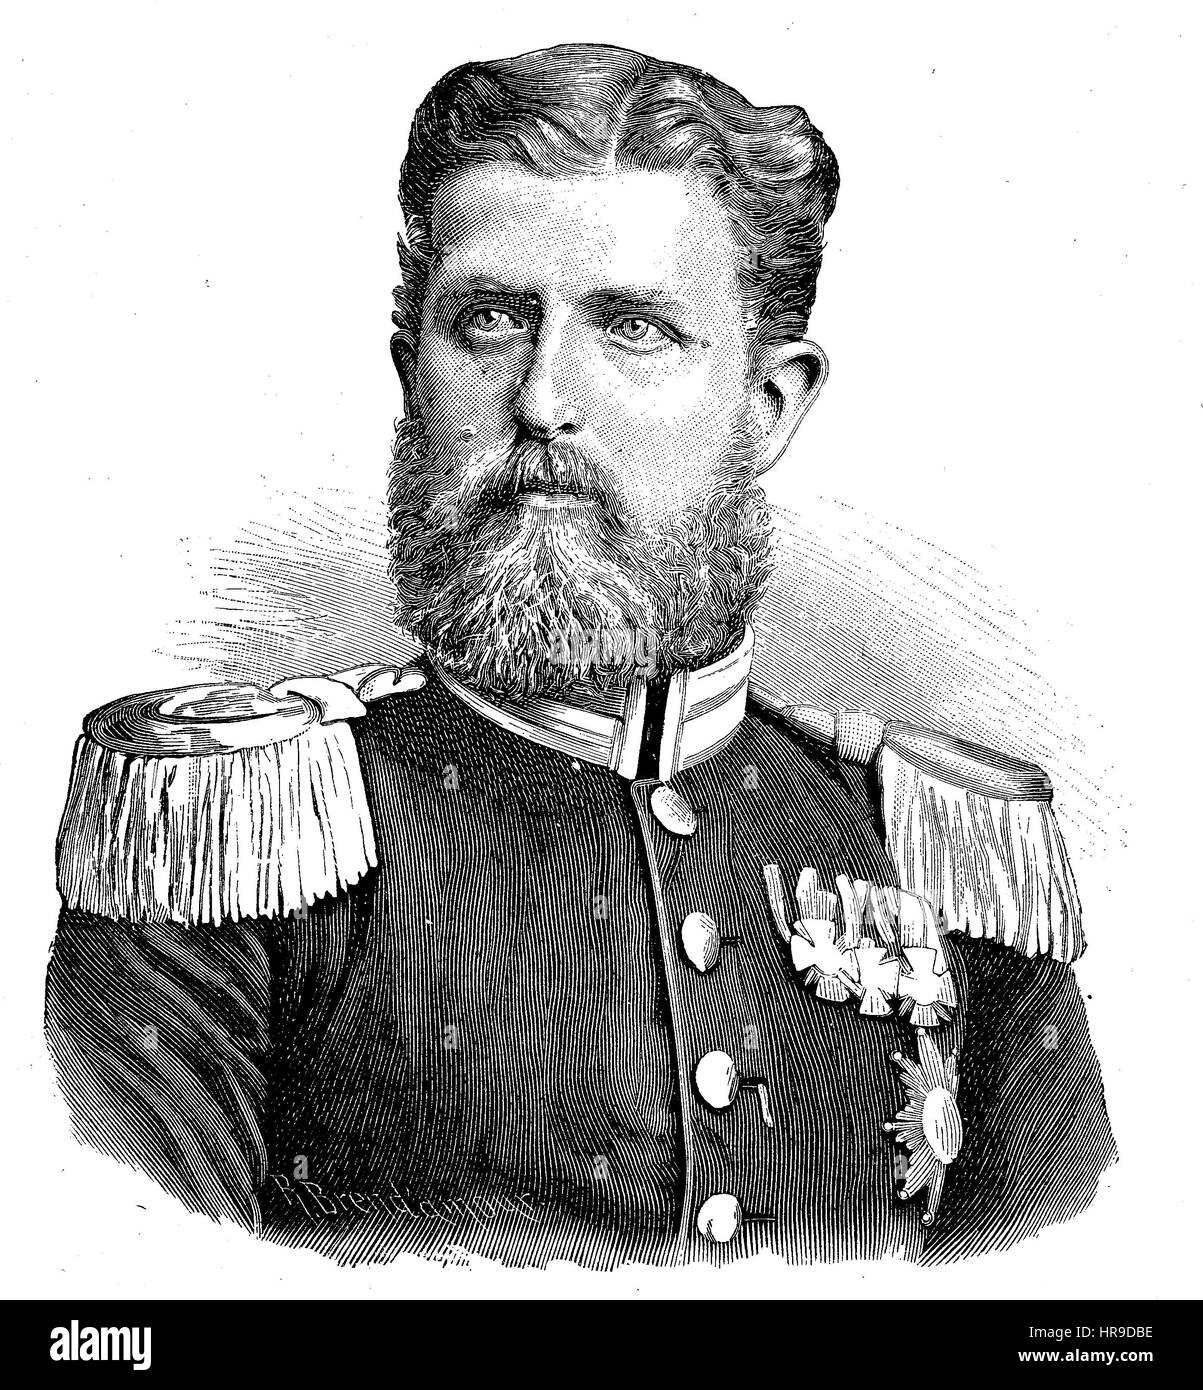 Leopold, Prince of Hohenzollern, Leopold Stephan Karl Anton Gustav Eduard Tassilo Fuerst von Hohenzollern, 1835 - 1905, was the head of the Swabian branch of the House of Hohenzollern, and played a fleeting role in European power politics, in connection with the Franco-Prussian War., Situation from the time of The Franco-Prussian War or Franco-German War,  Deutsch-Franzoesischer Krieg, 1870-1871, Reproduction of an original woodcut from the year 1885, digital improved Stock Photo